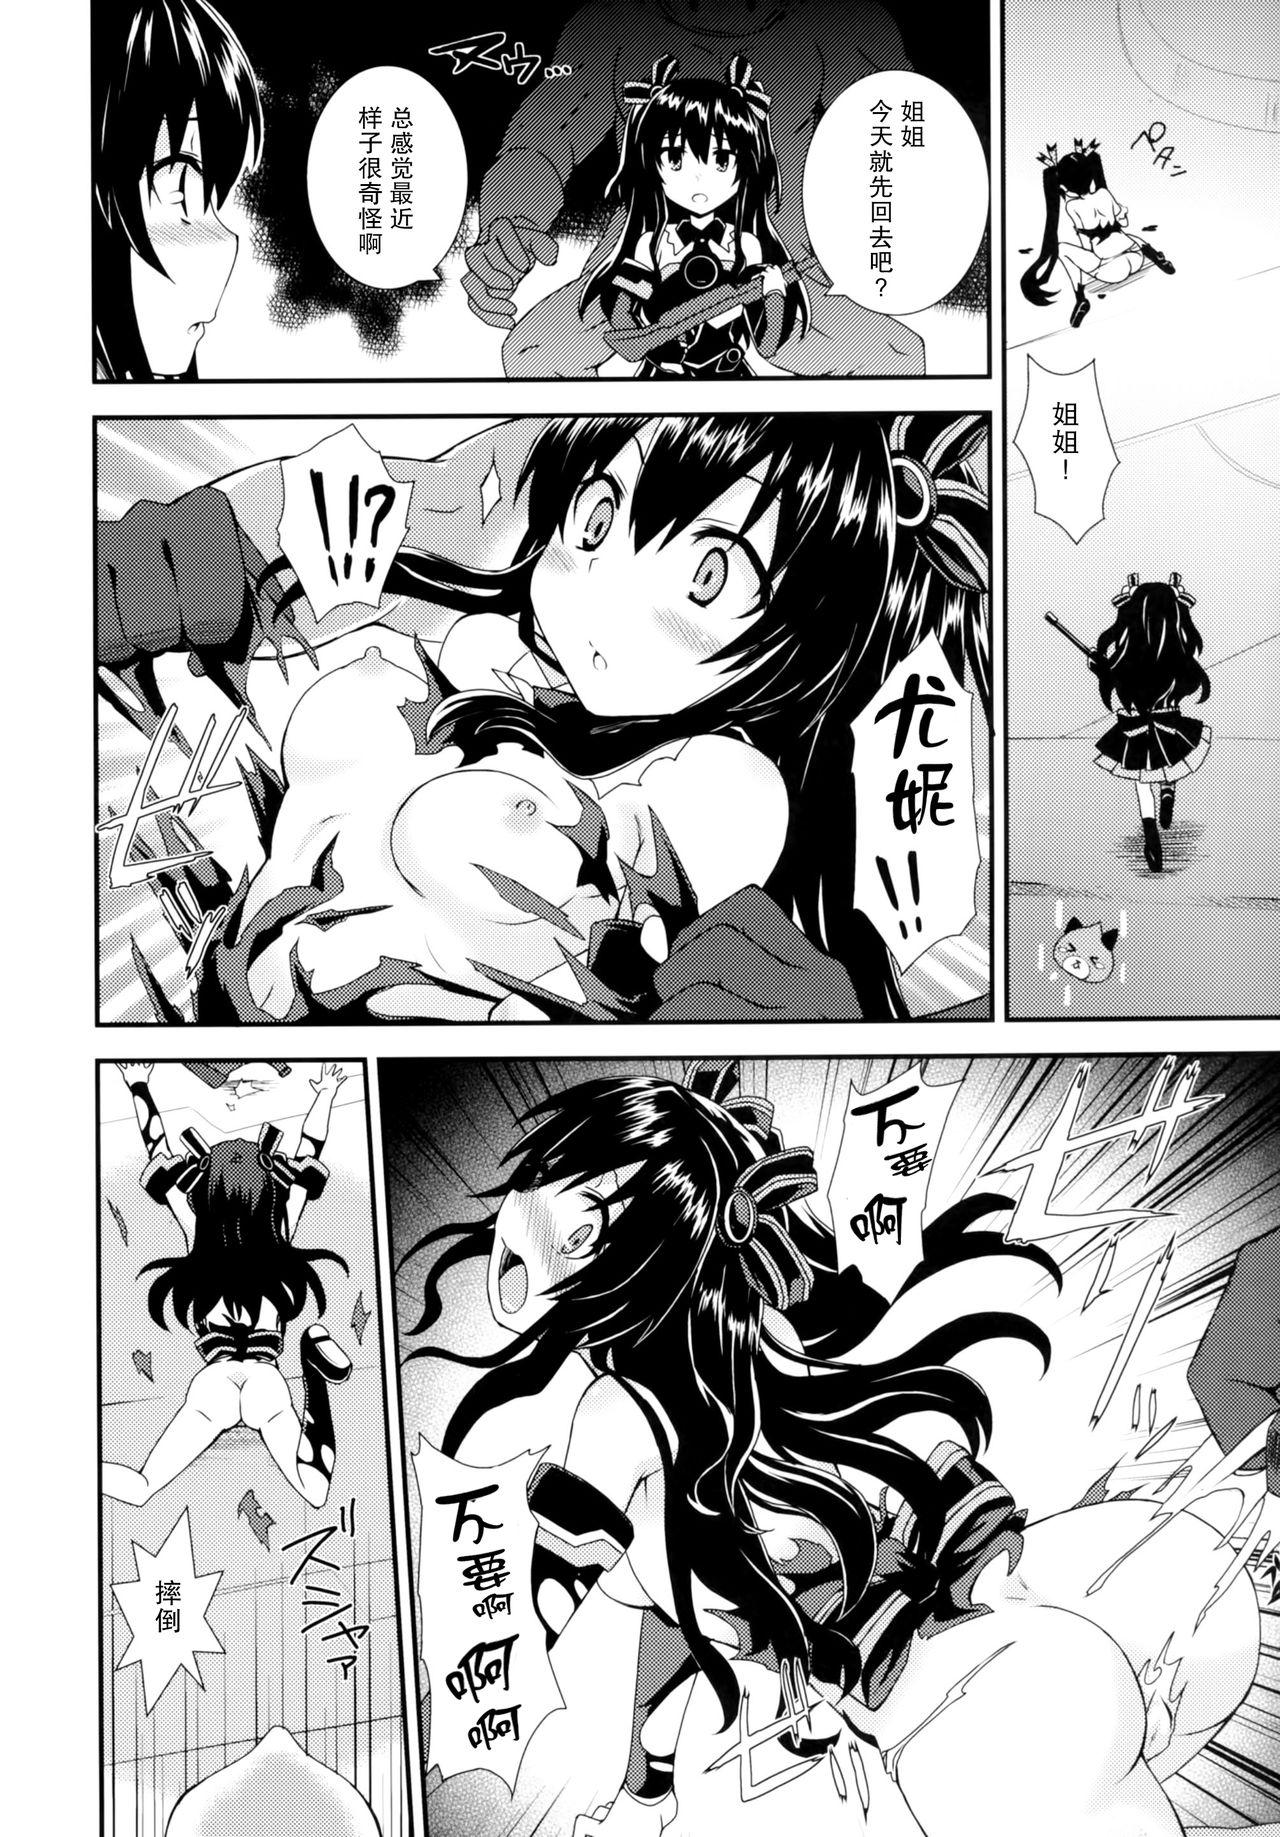 Rough Fuck Inyoku no Sustain - Sustain of Lust - Hyperdimension neptunia Wetpussy - Page 8